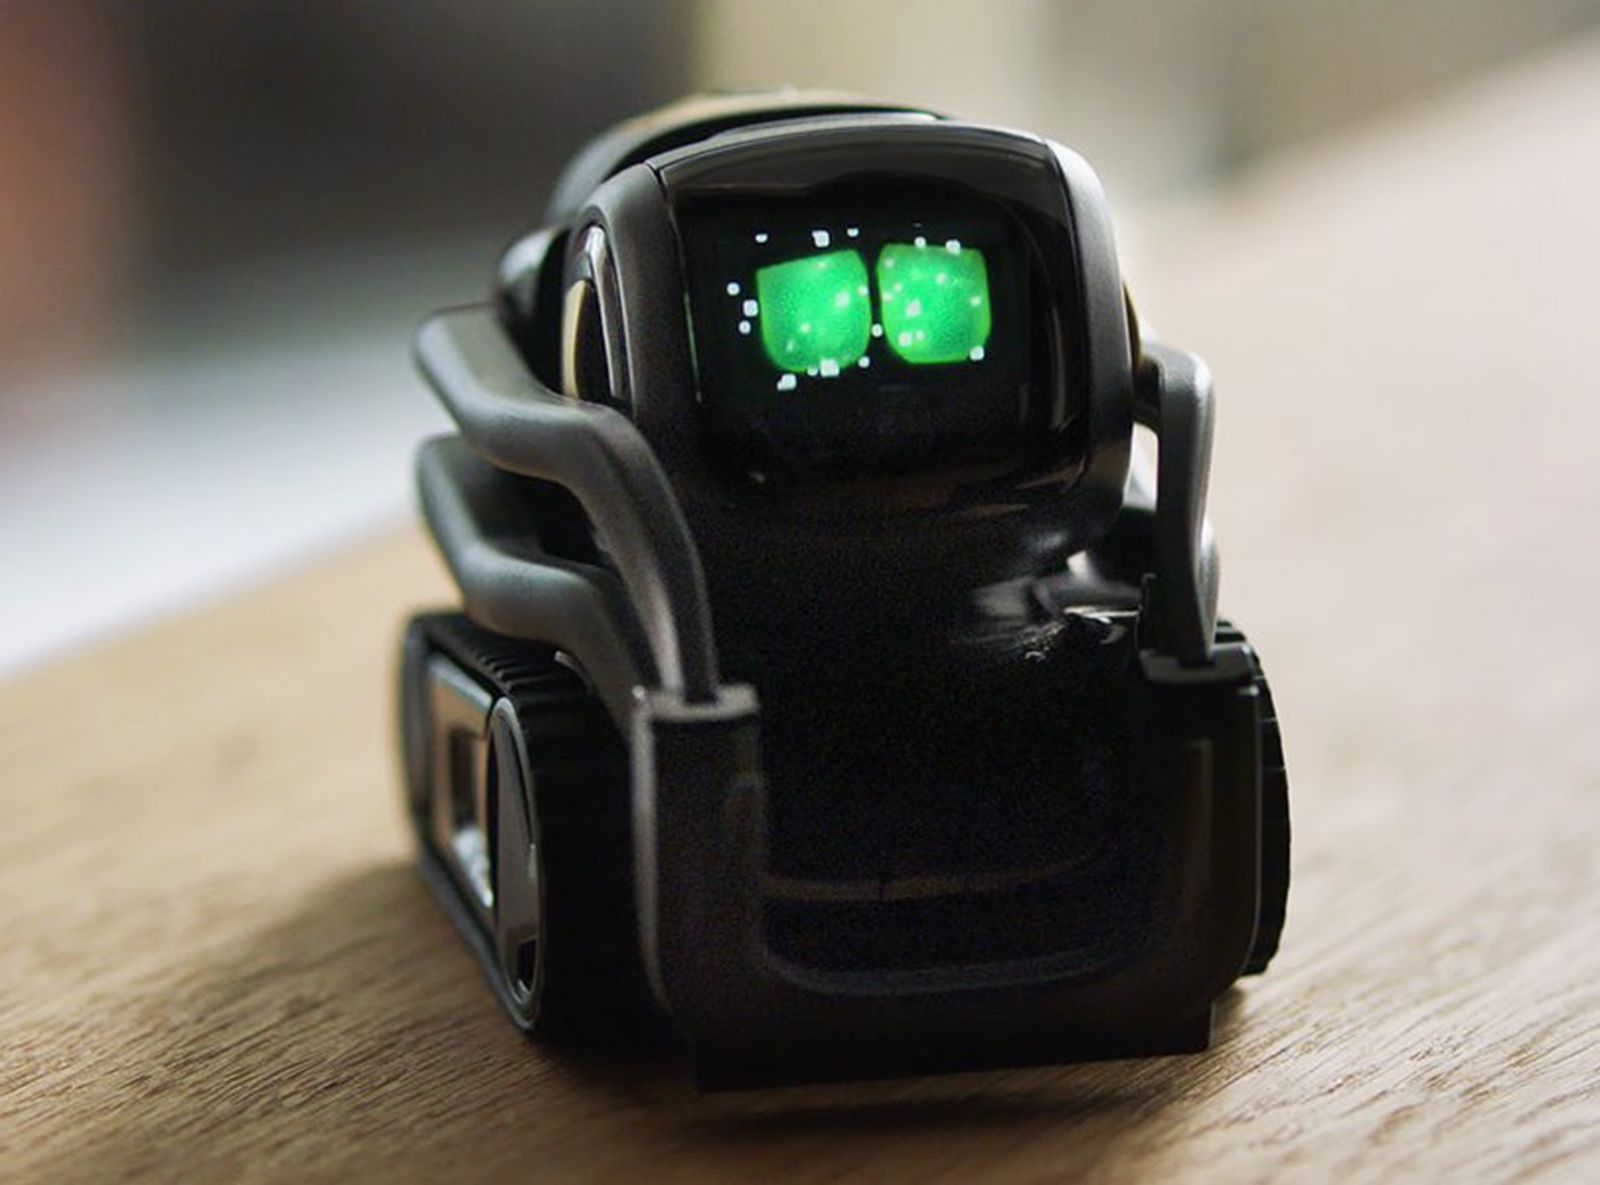 Anki S Vector Home Robot Now Available For Purchase Macrumors